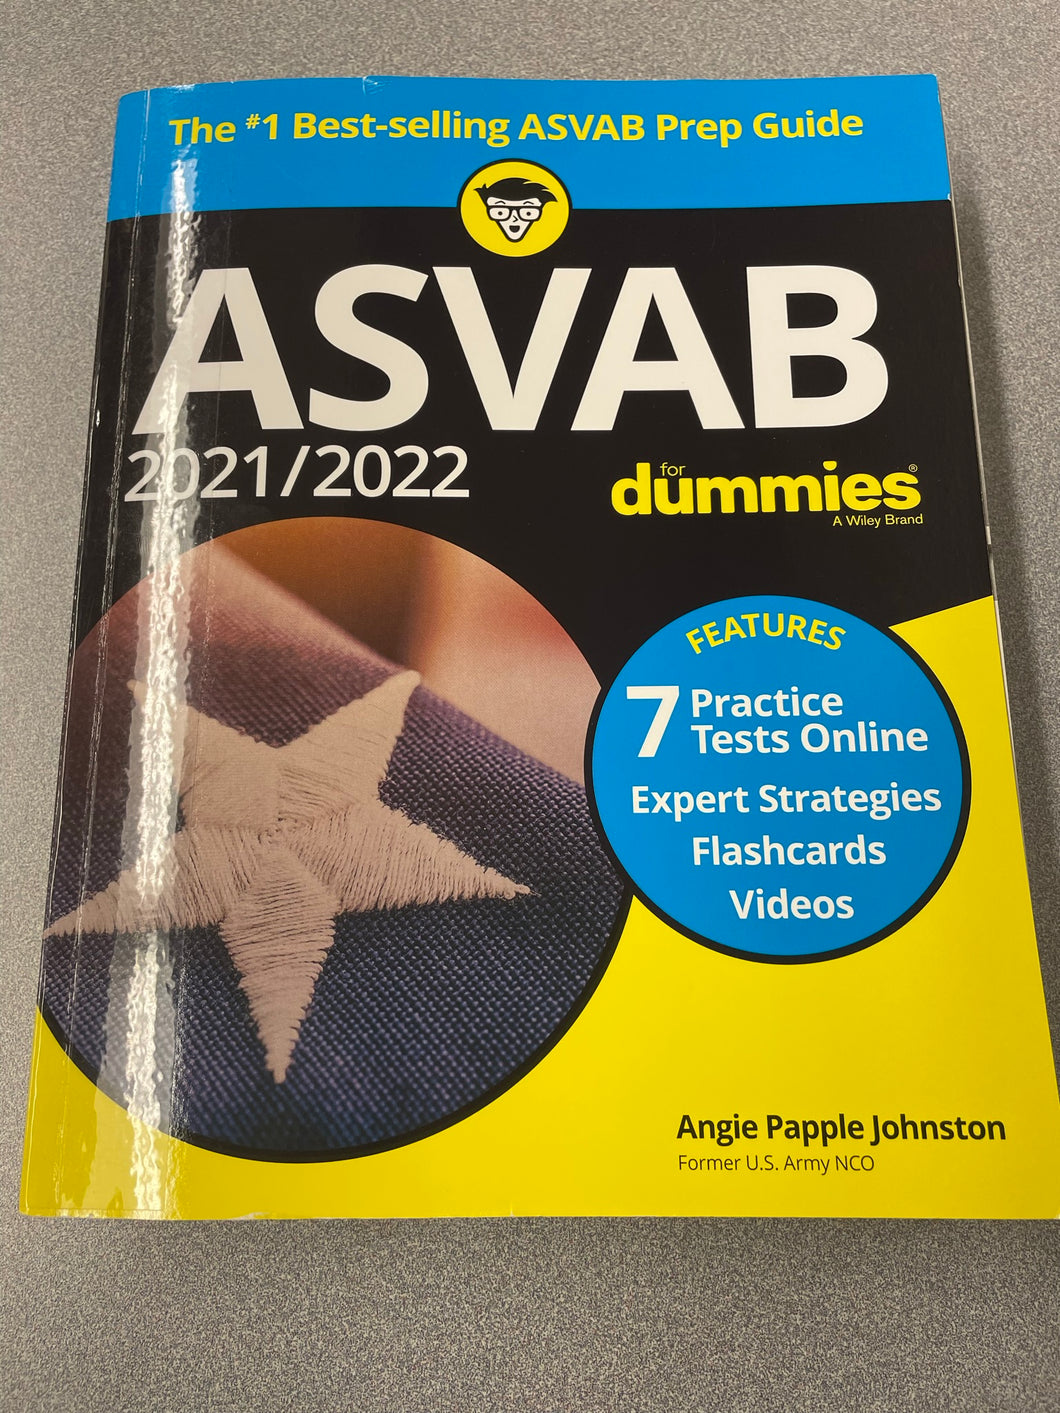 ASVAB for Dummies 2021/2022, Johnston, Angie Papple [2022] TP 10/22